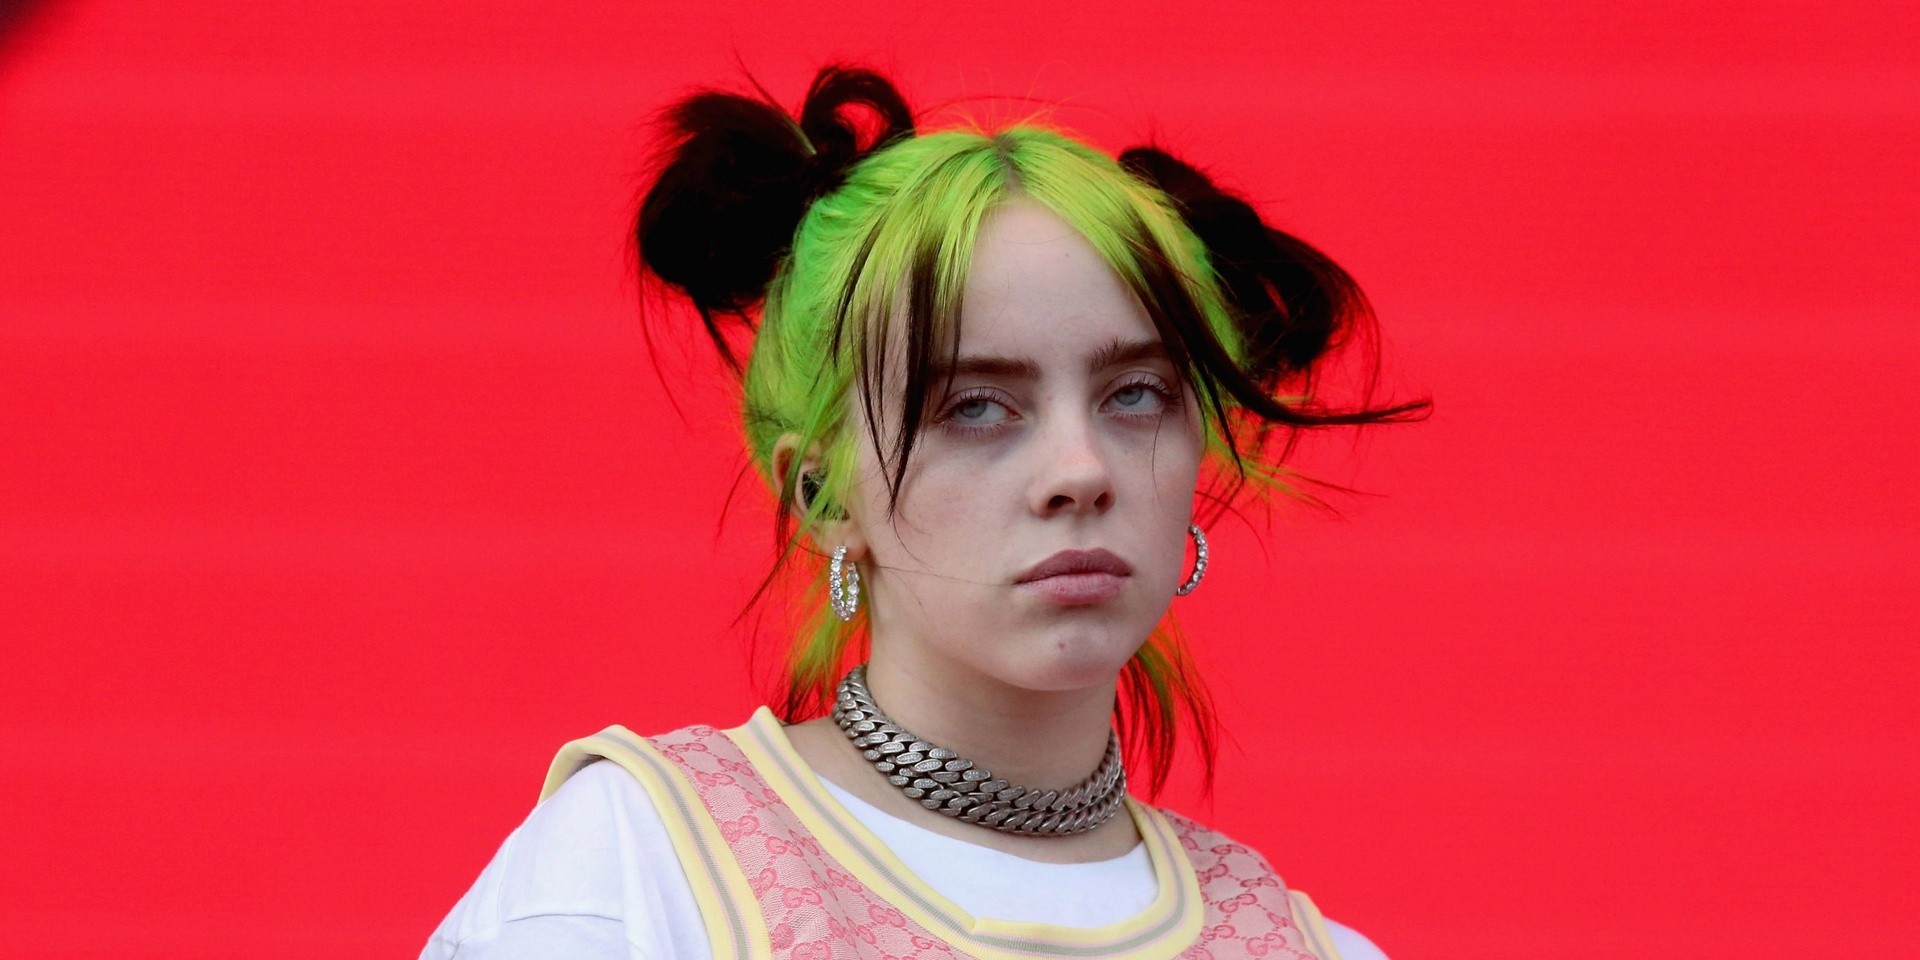 Billie Eilish releases new song 'everything i wanted'